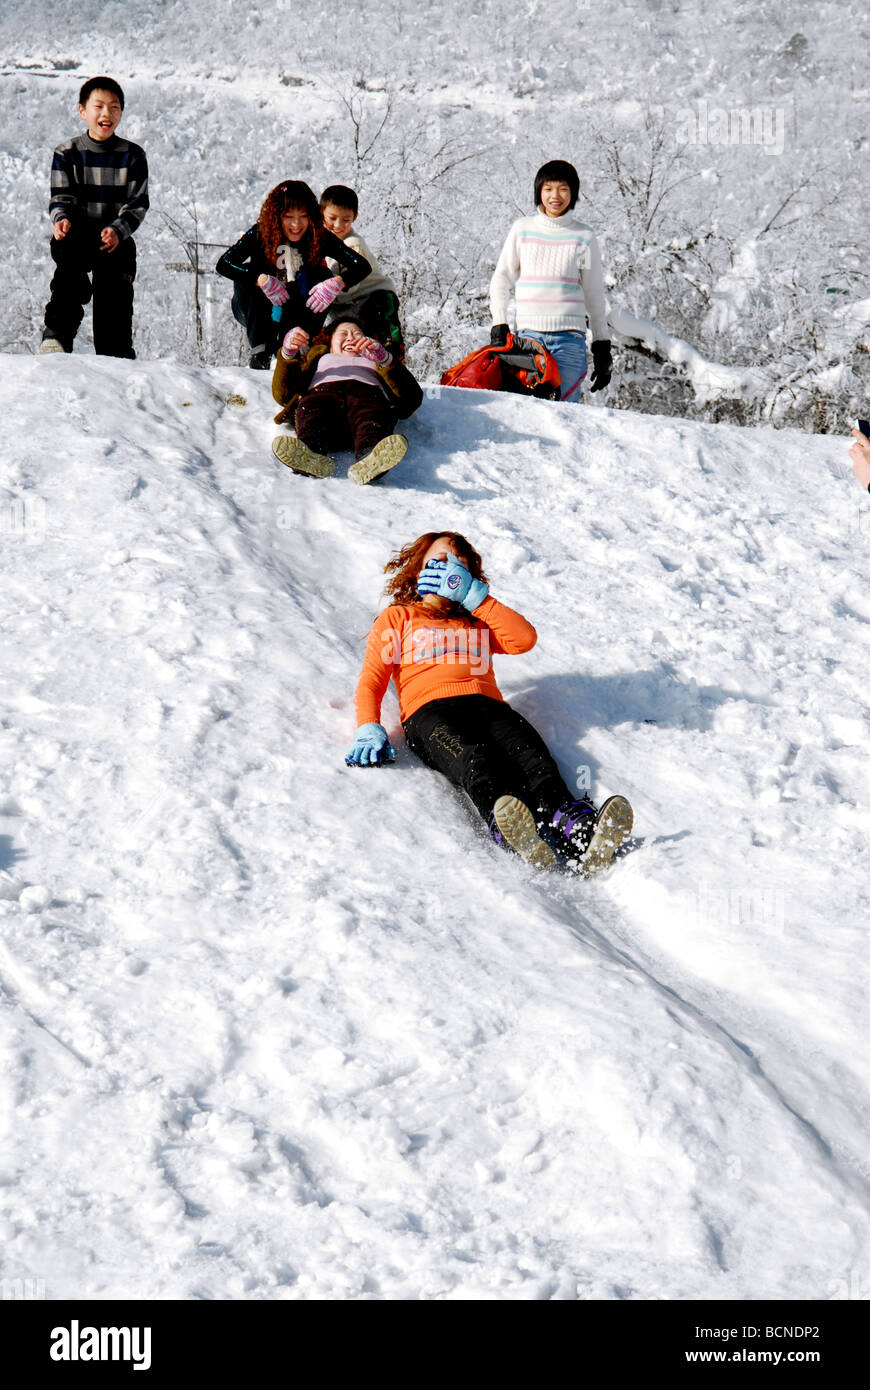 Young women sliding down the slope, Xiling Ski Resort, Xiling Snow